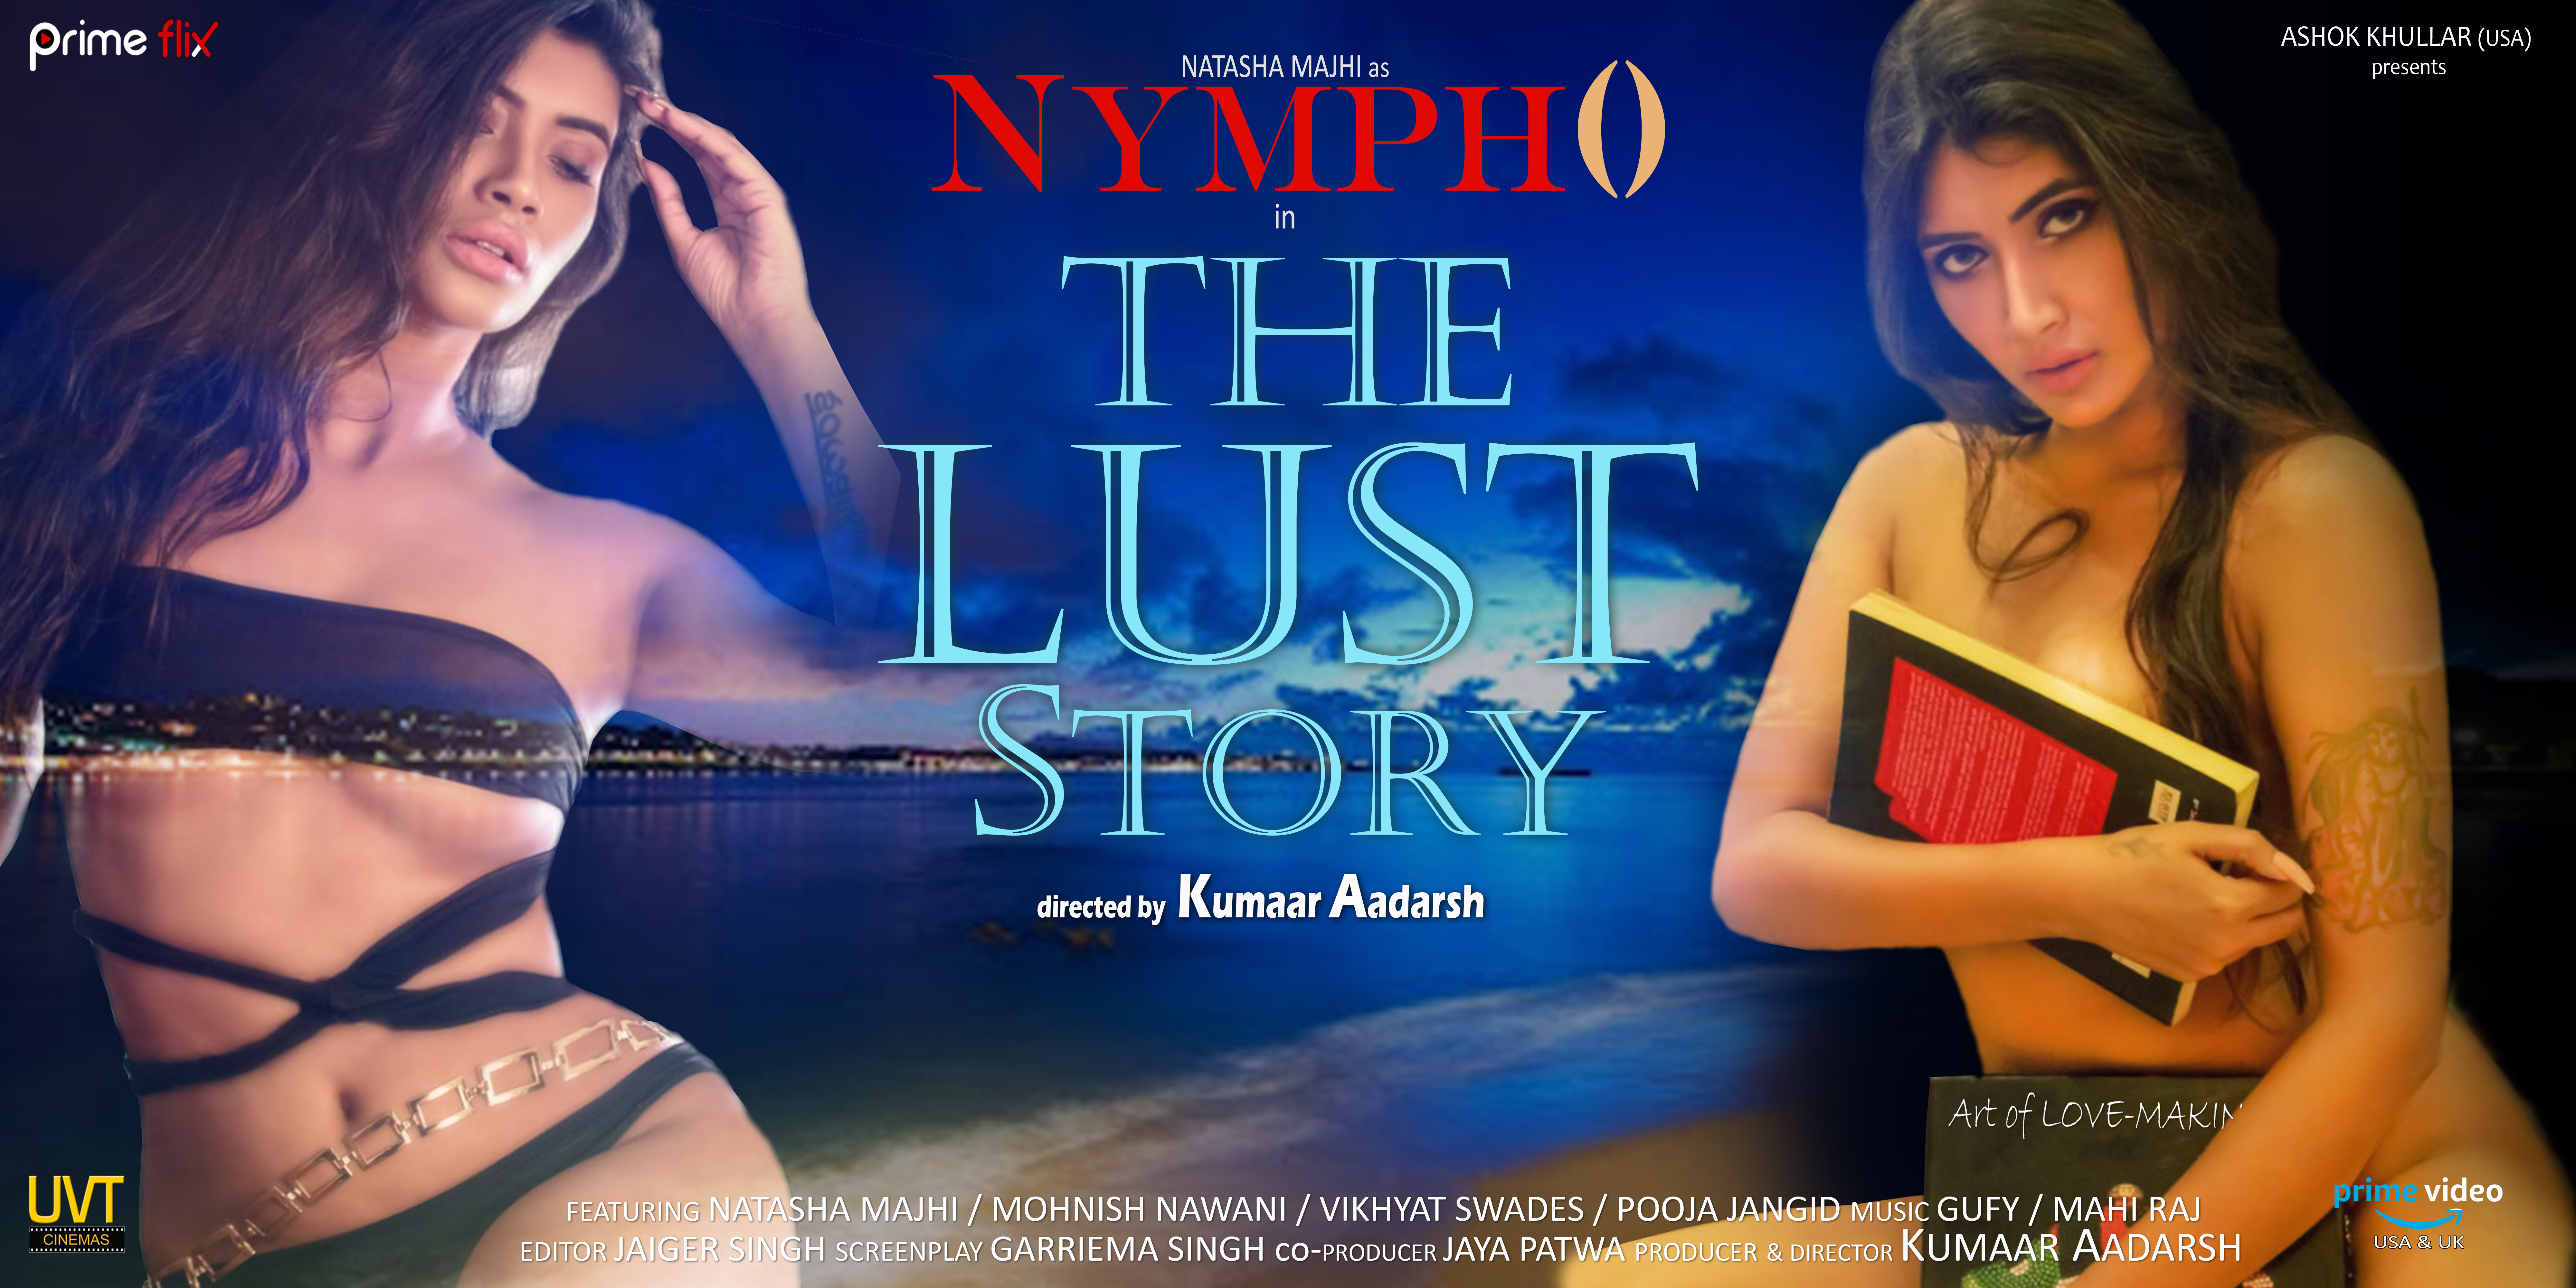 Nympho The Lust Story 2020 S01 Hindi Complete Primeflix Web Series 480p HDRip 400MB Download